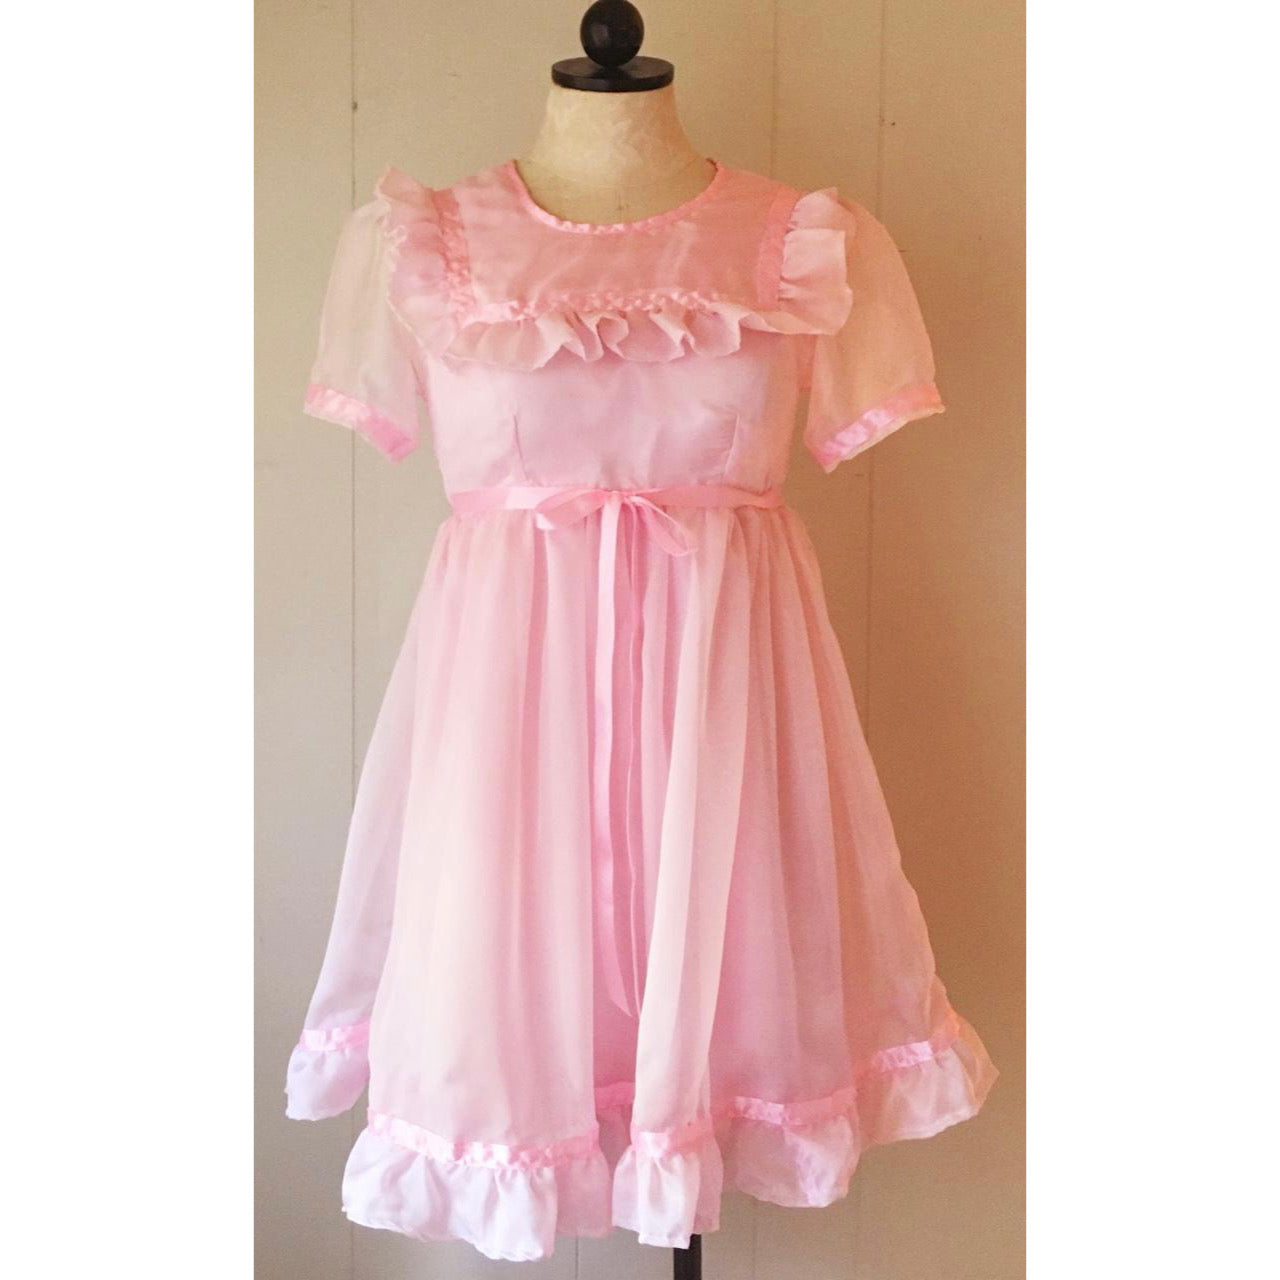 The Courtney Babydoll in Pink